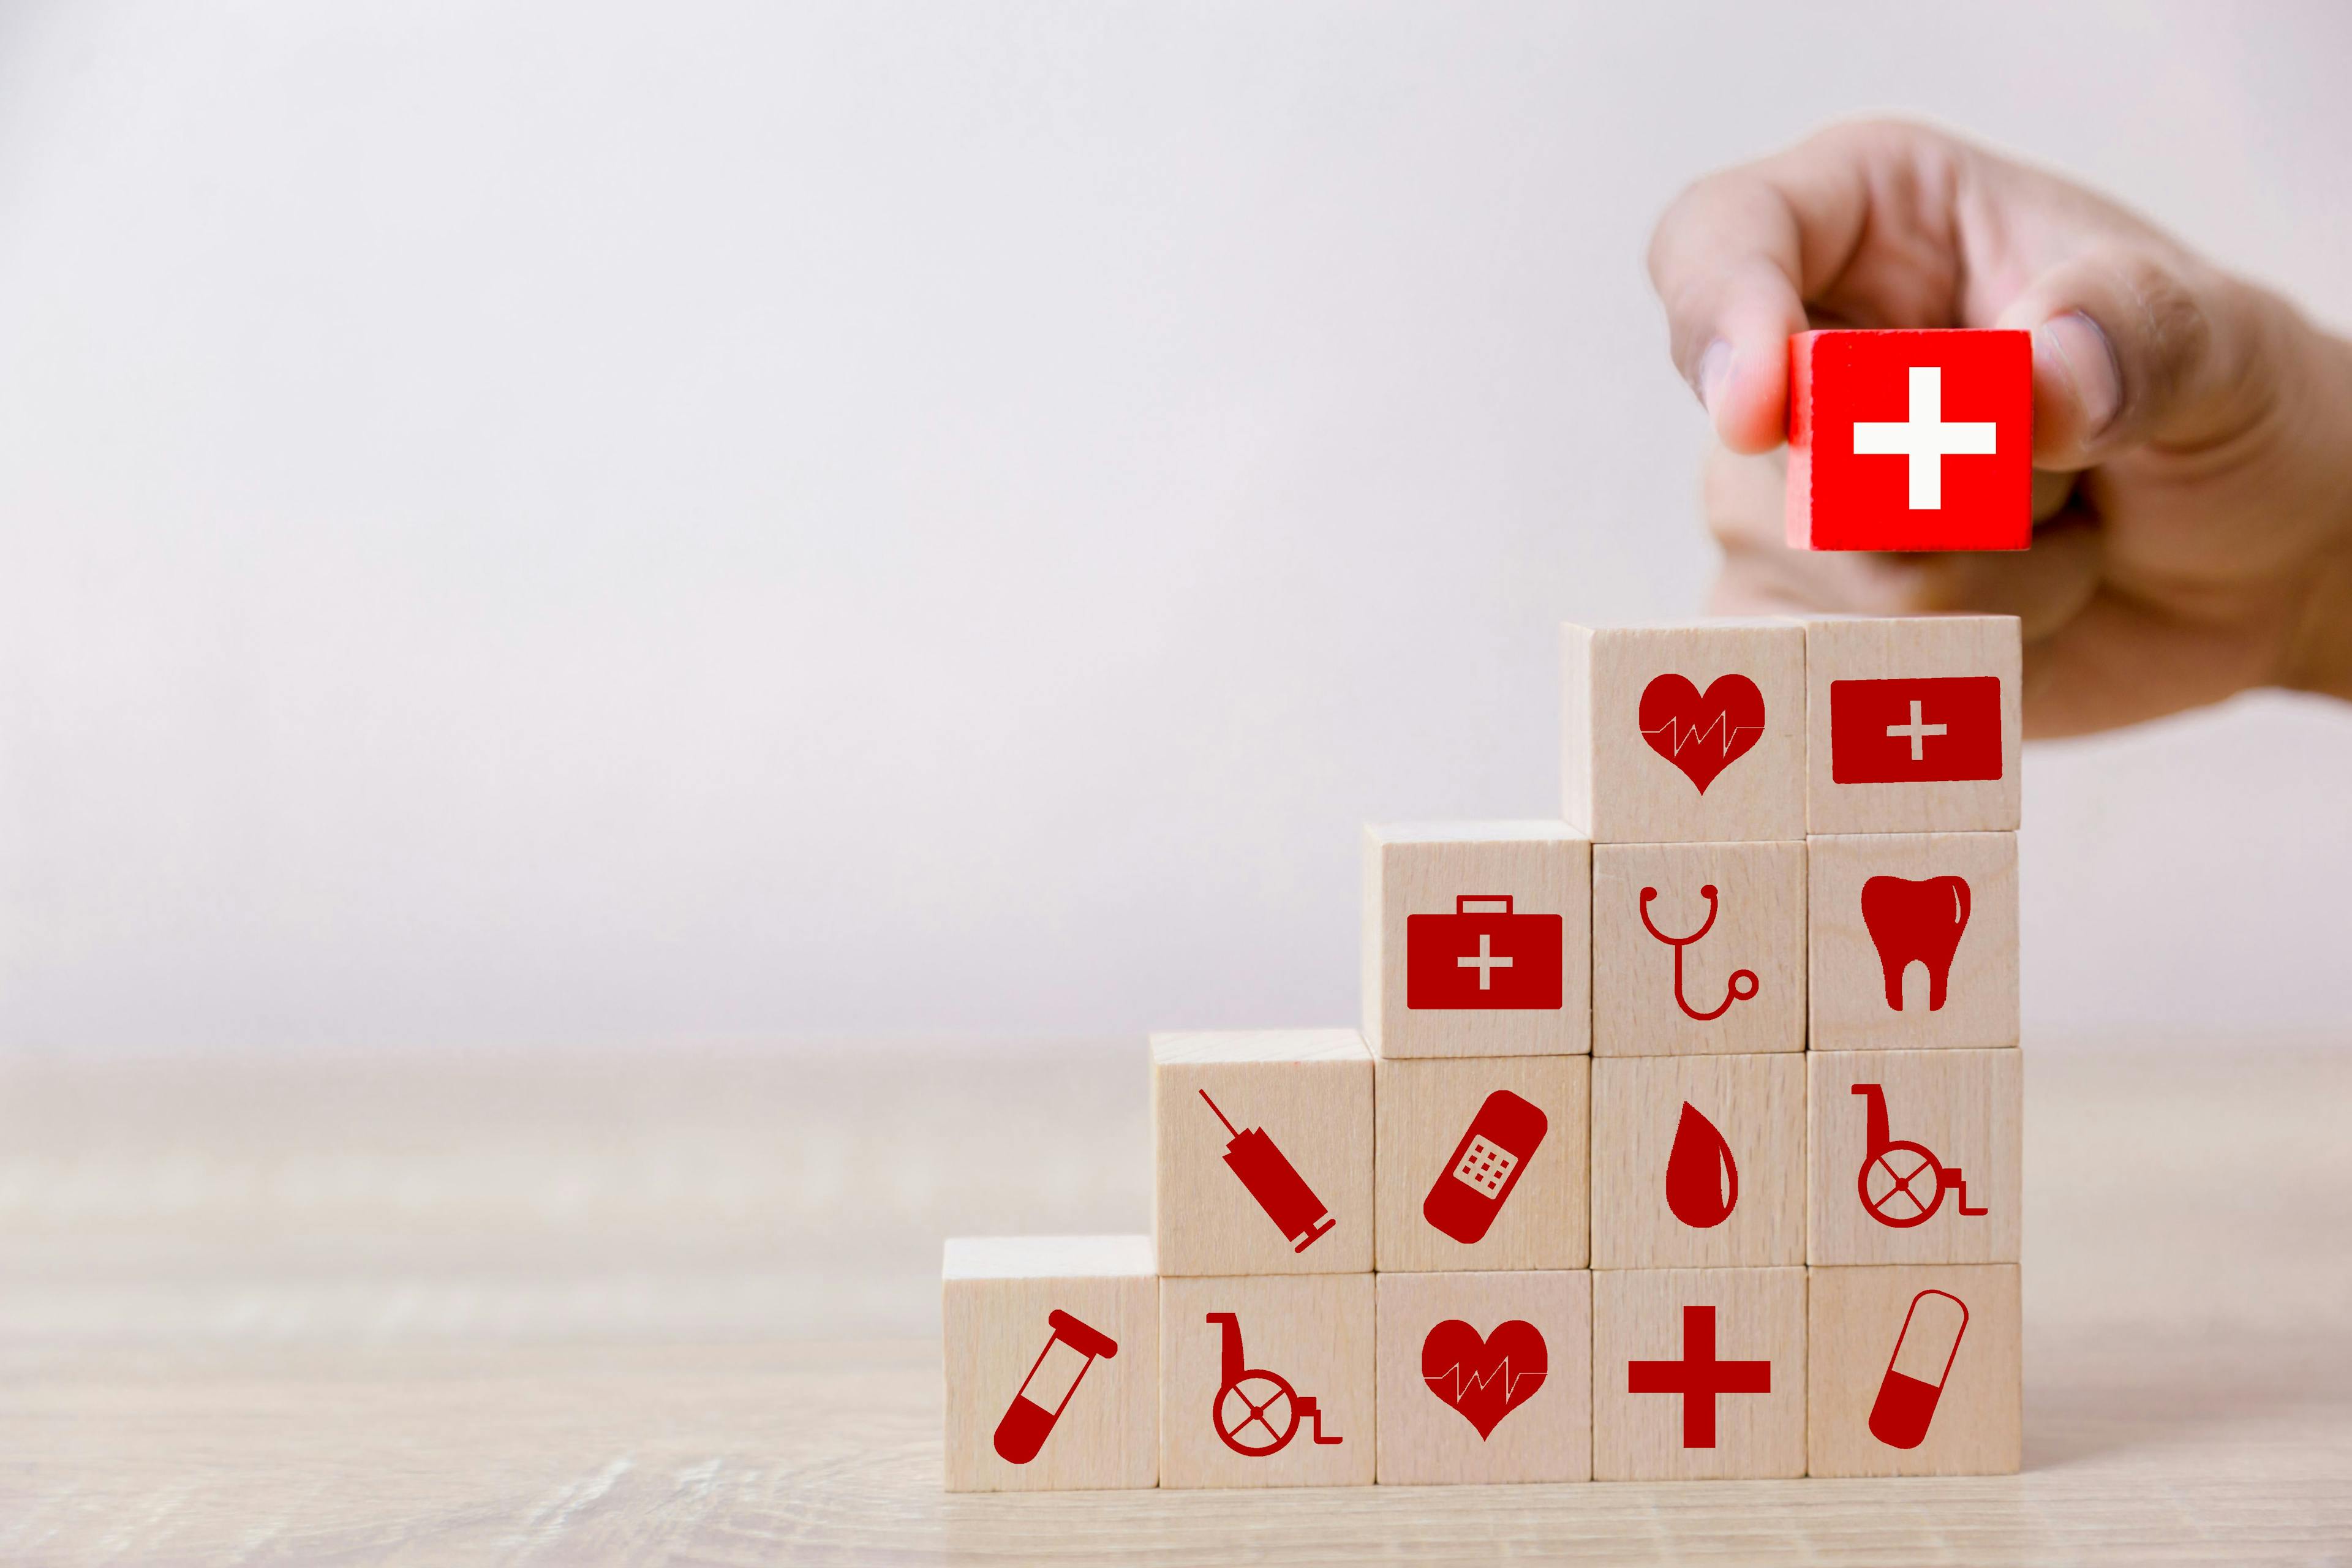 Stack of wood blocks with insurance and health care icons | Image credit: A stockphoto - stock.adobe.com